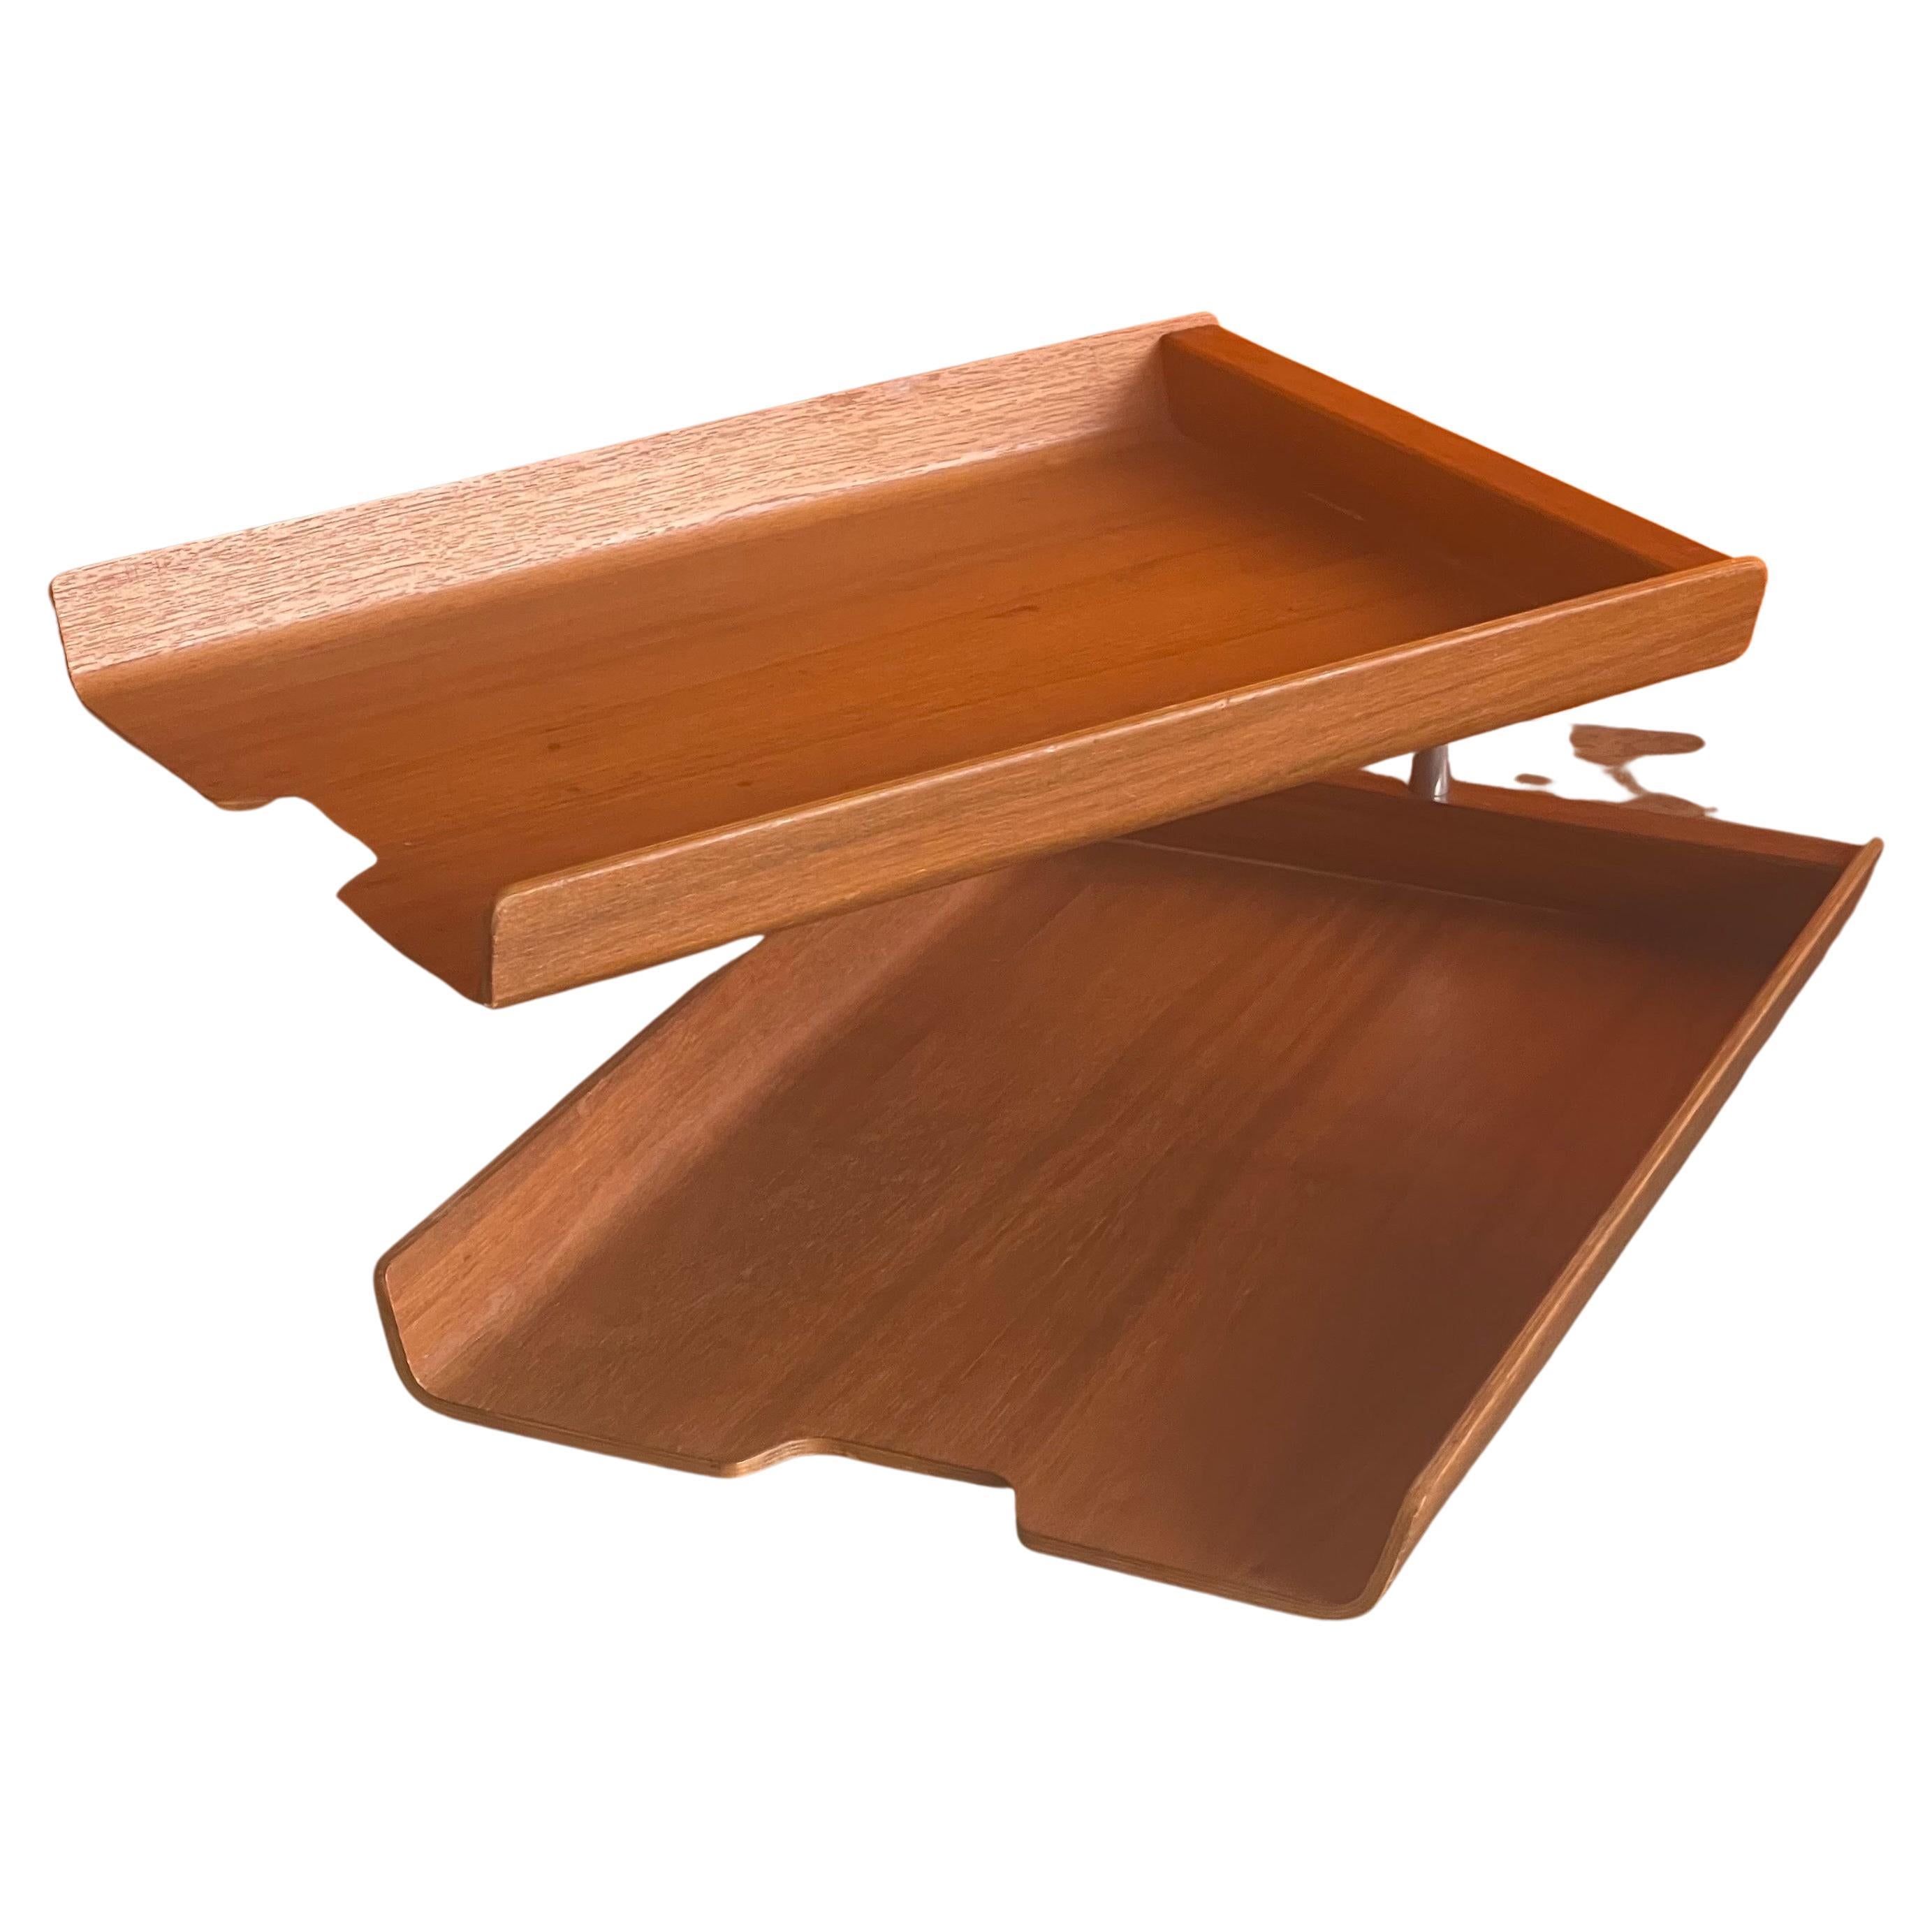 Very cool and functional double letter tray by Martin Aberg for Rainbow Wood Products Company of Sweden, circa 1970s. The trays are made of molded teak plywood and can swivel into any number of configurations to meet your office needs. The set is in